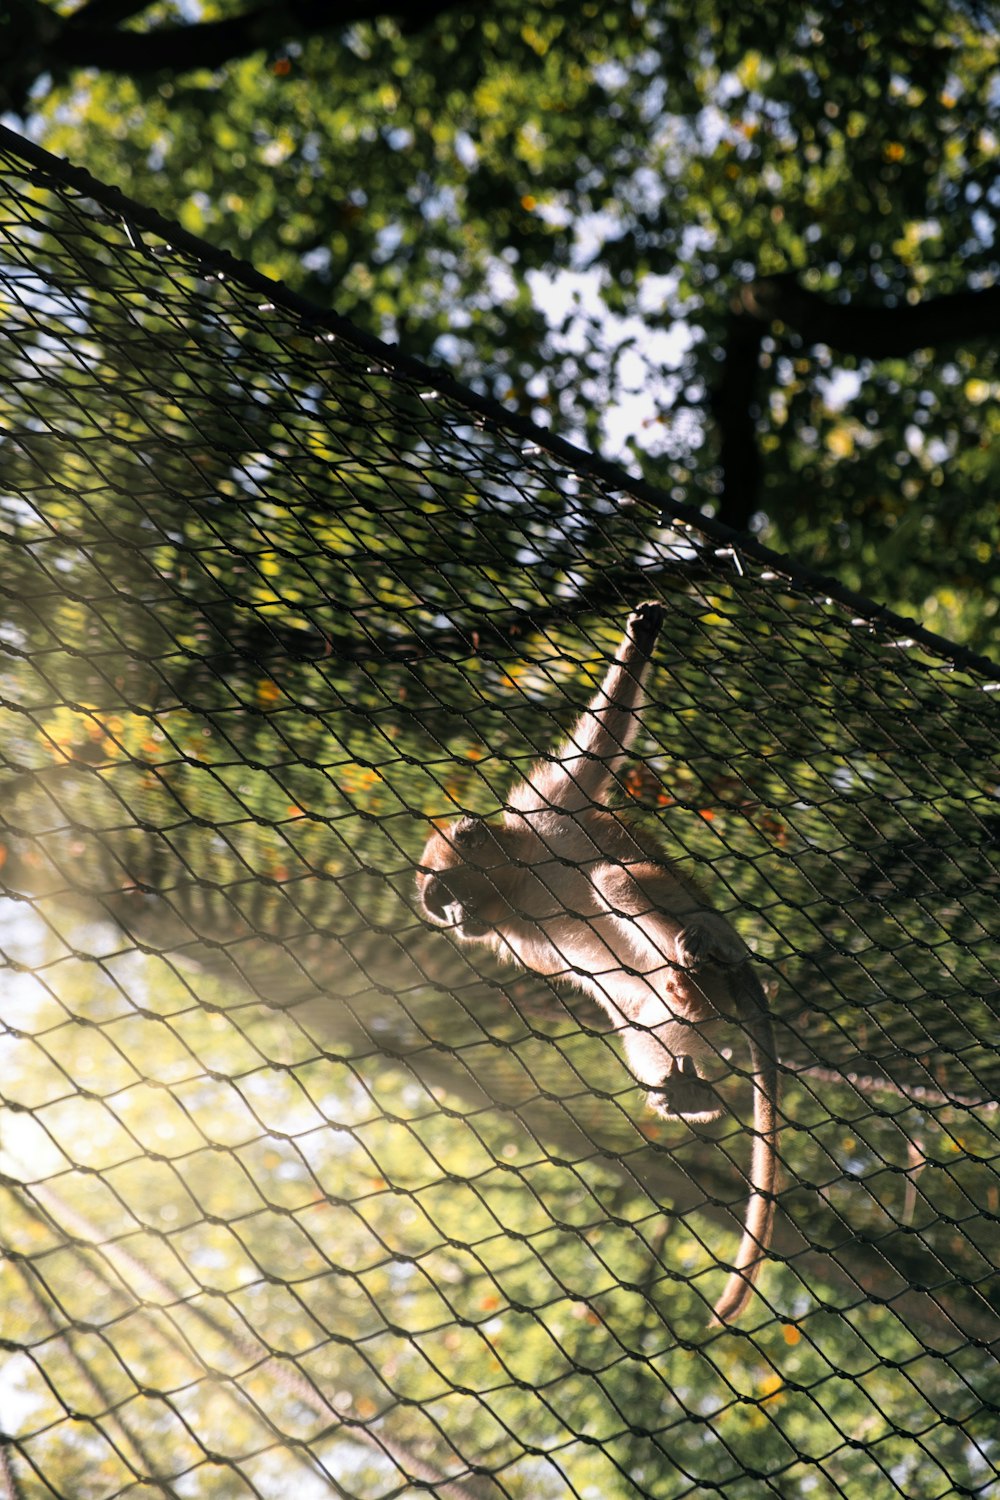 a monkey is climbing up a mesh fence